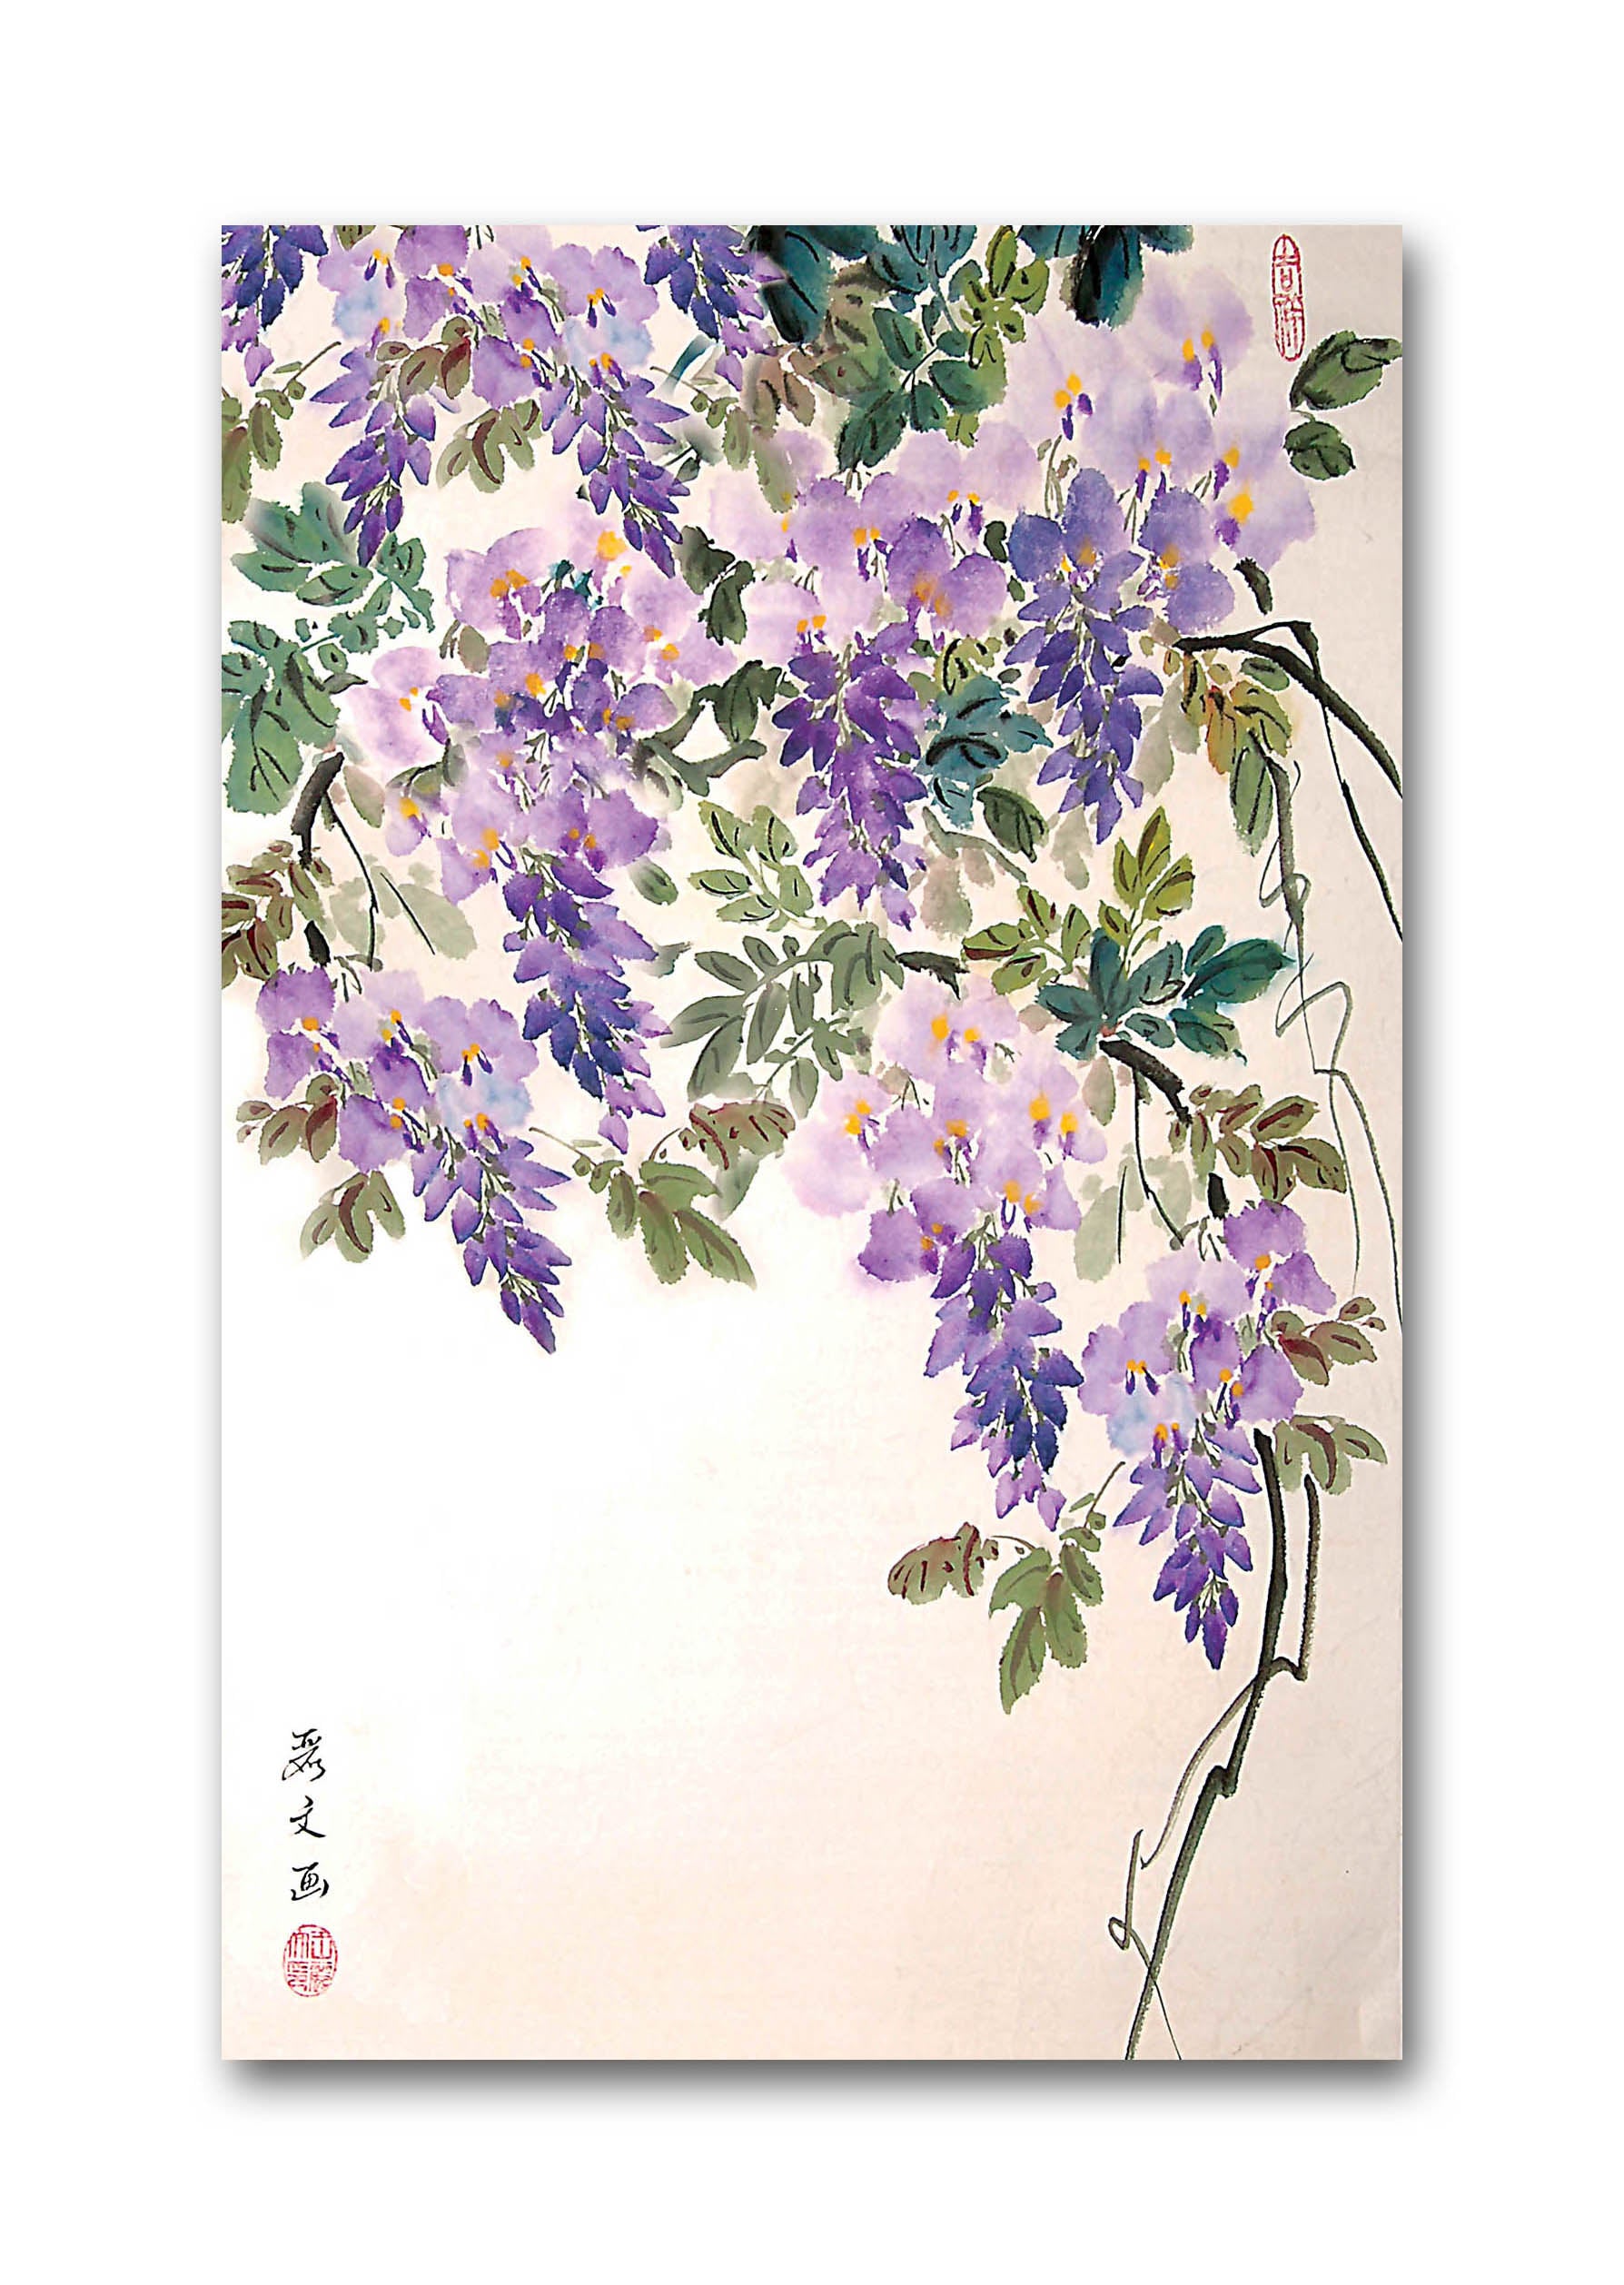 Wisteria blooms  - Canvas Painting - Unframed